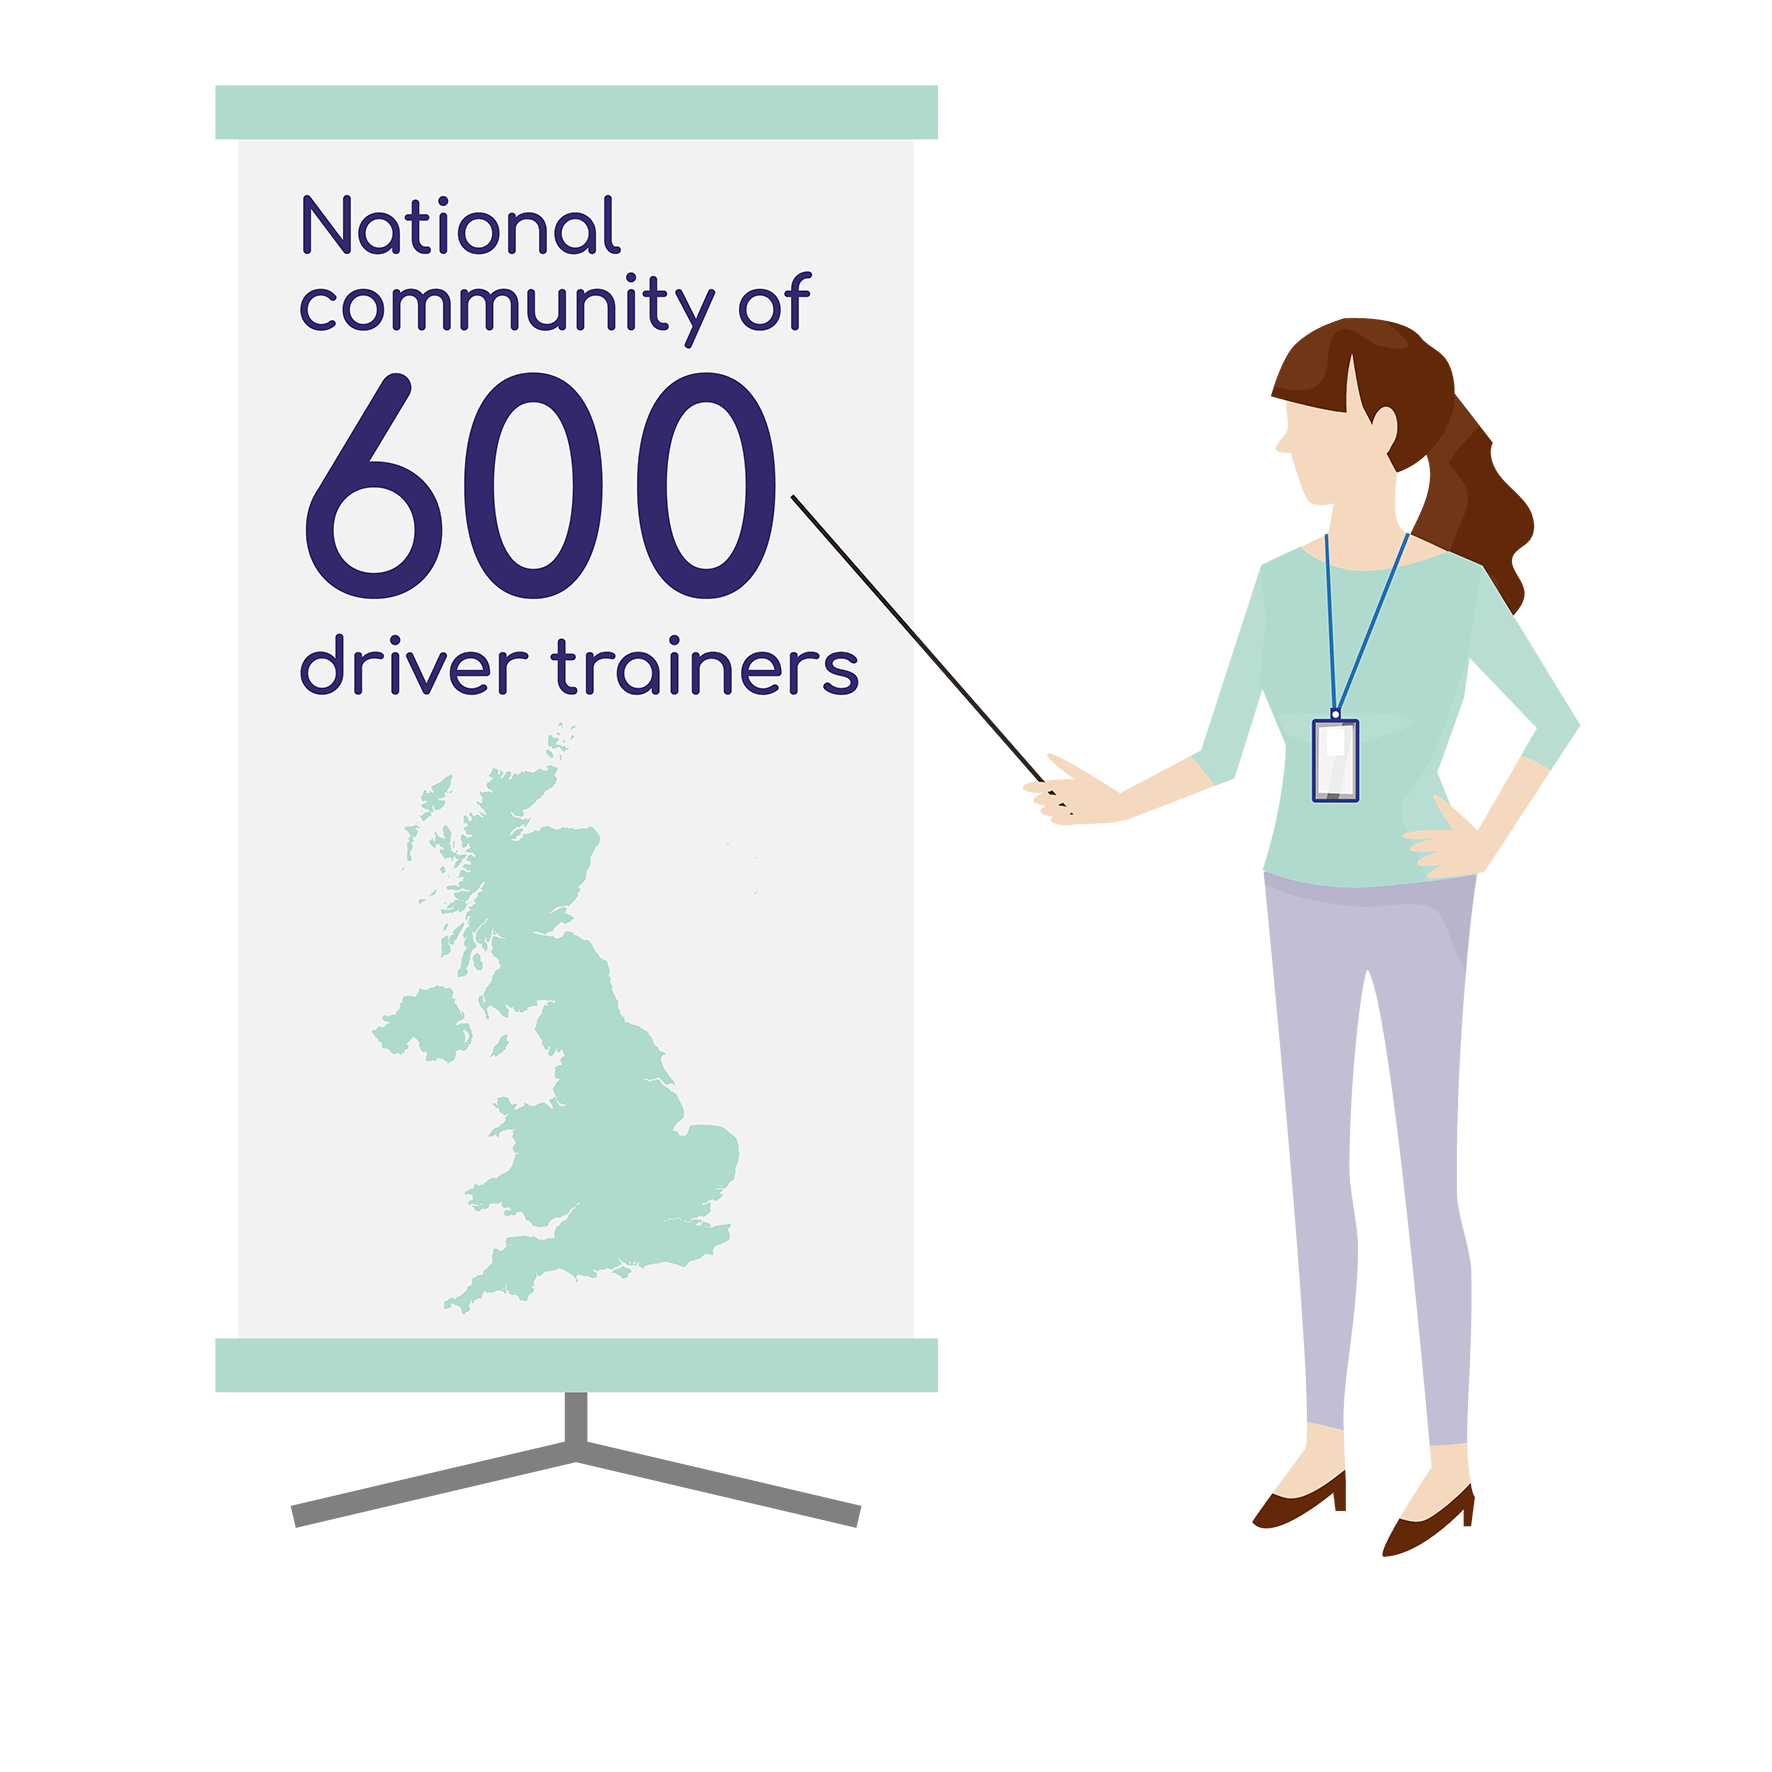 National community of 600 driver trainers